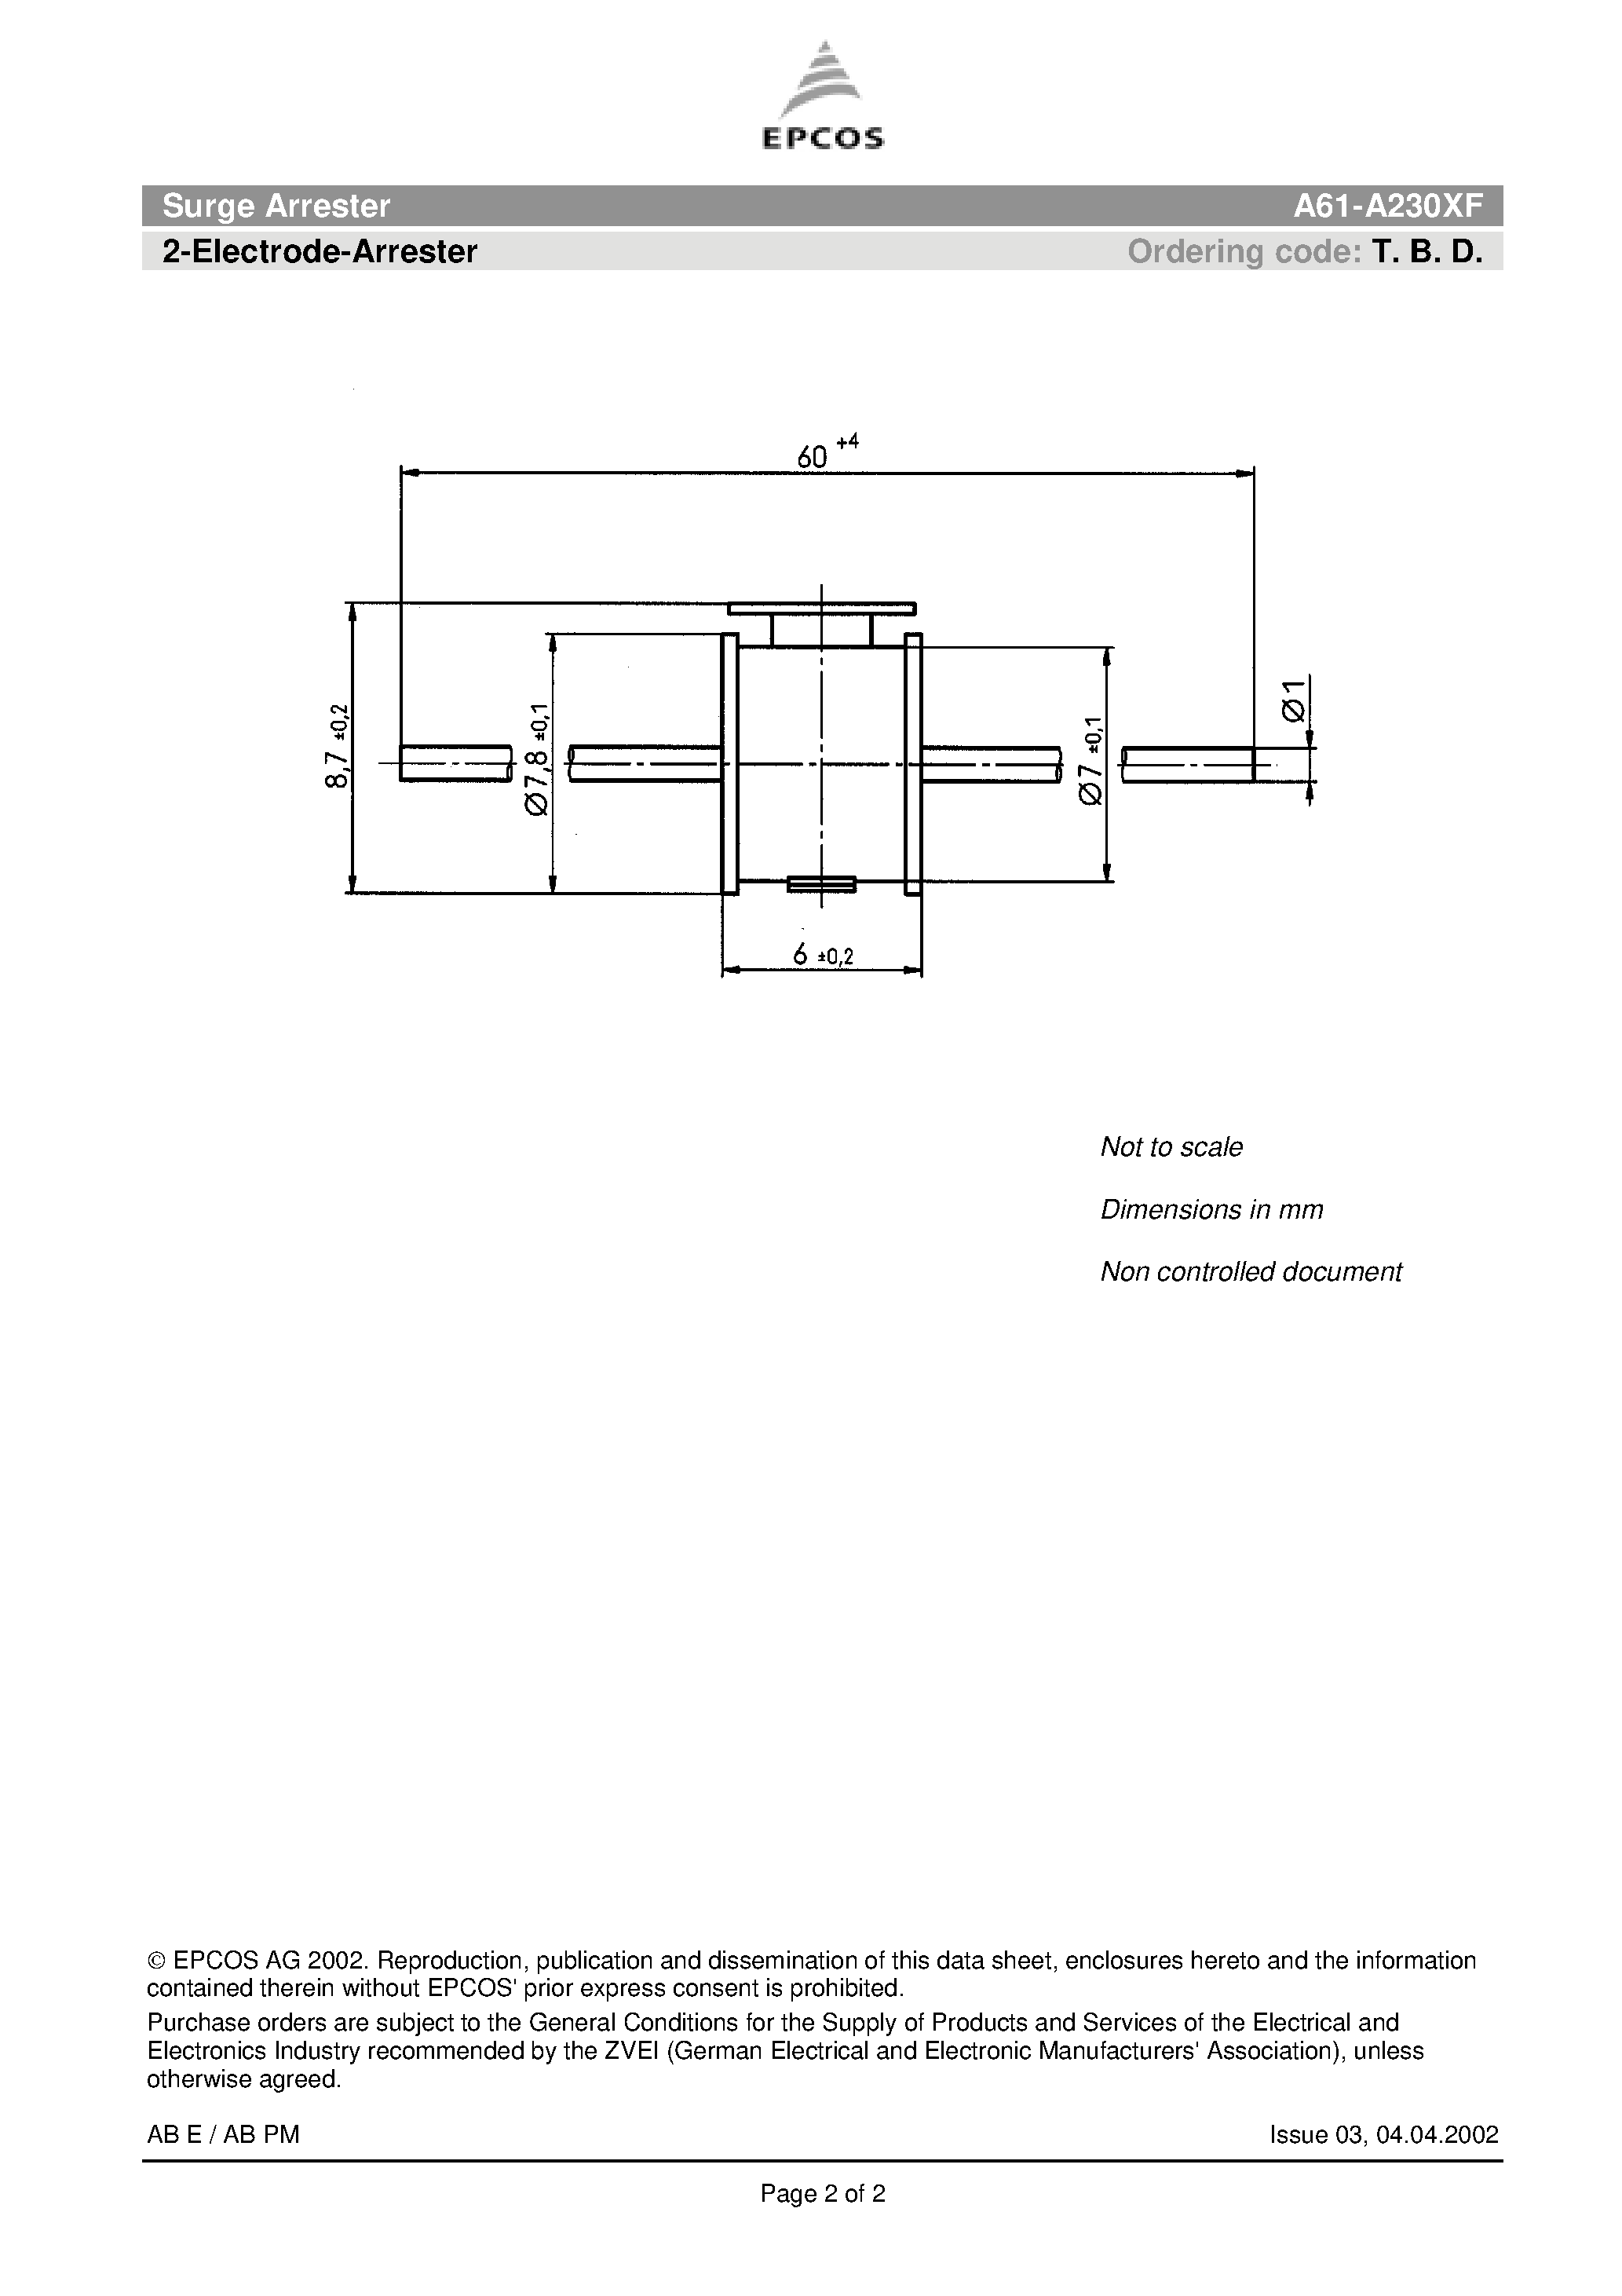 Datasheet A61-A230XF - 2-Electrode-Arrester page 2